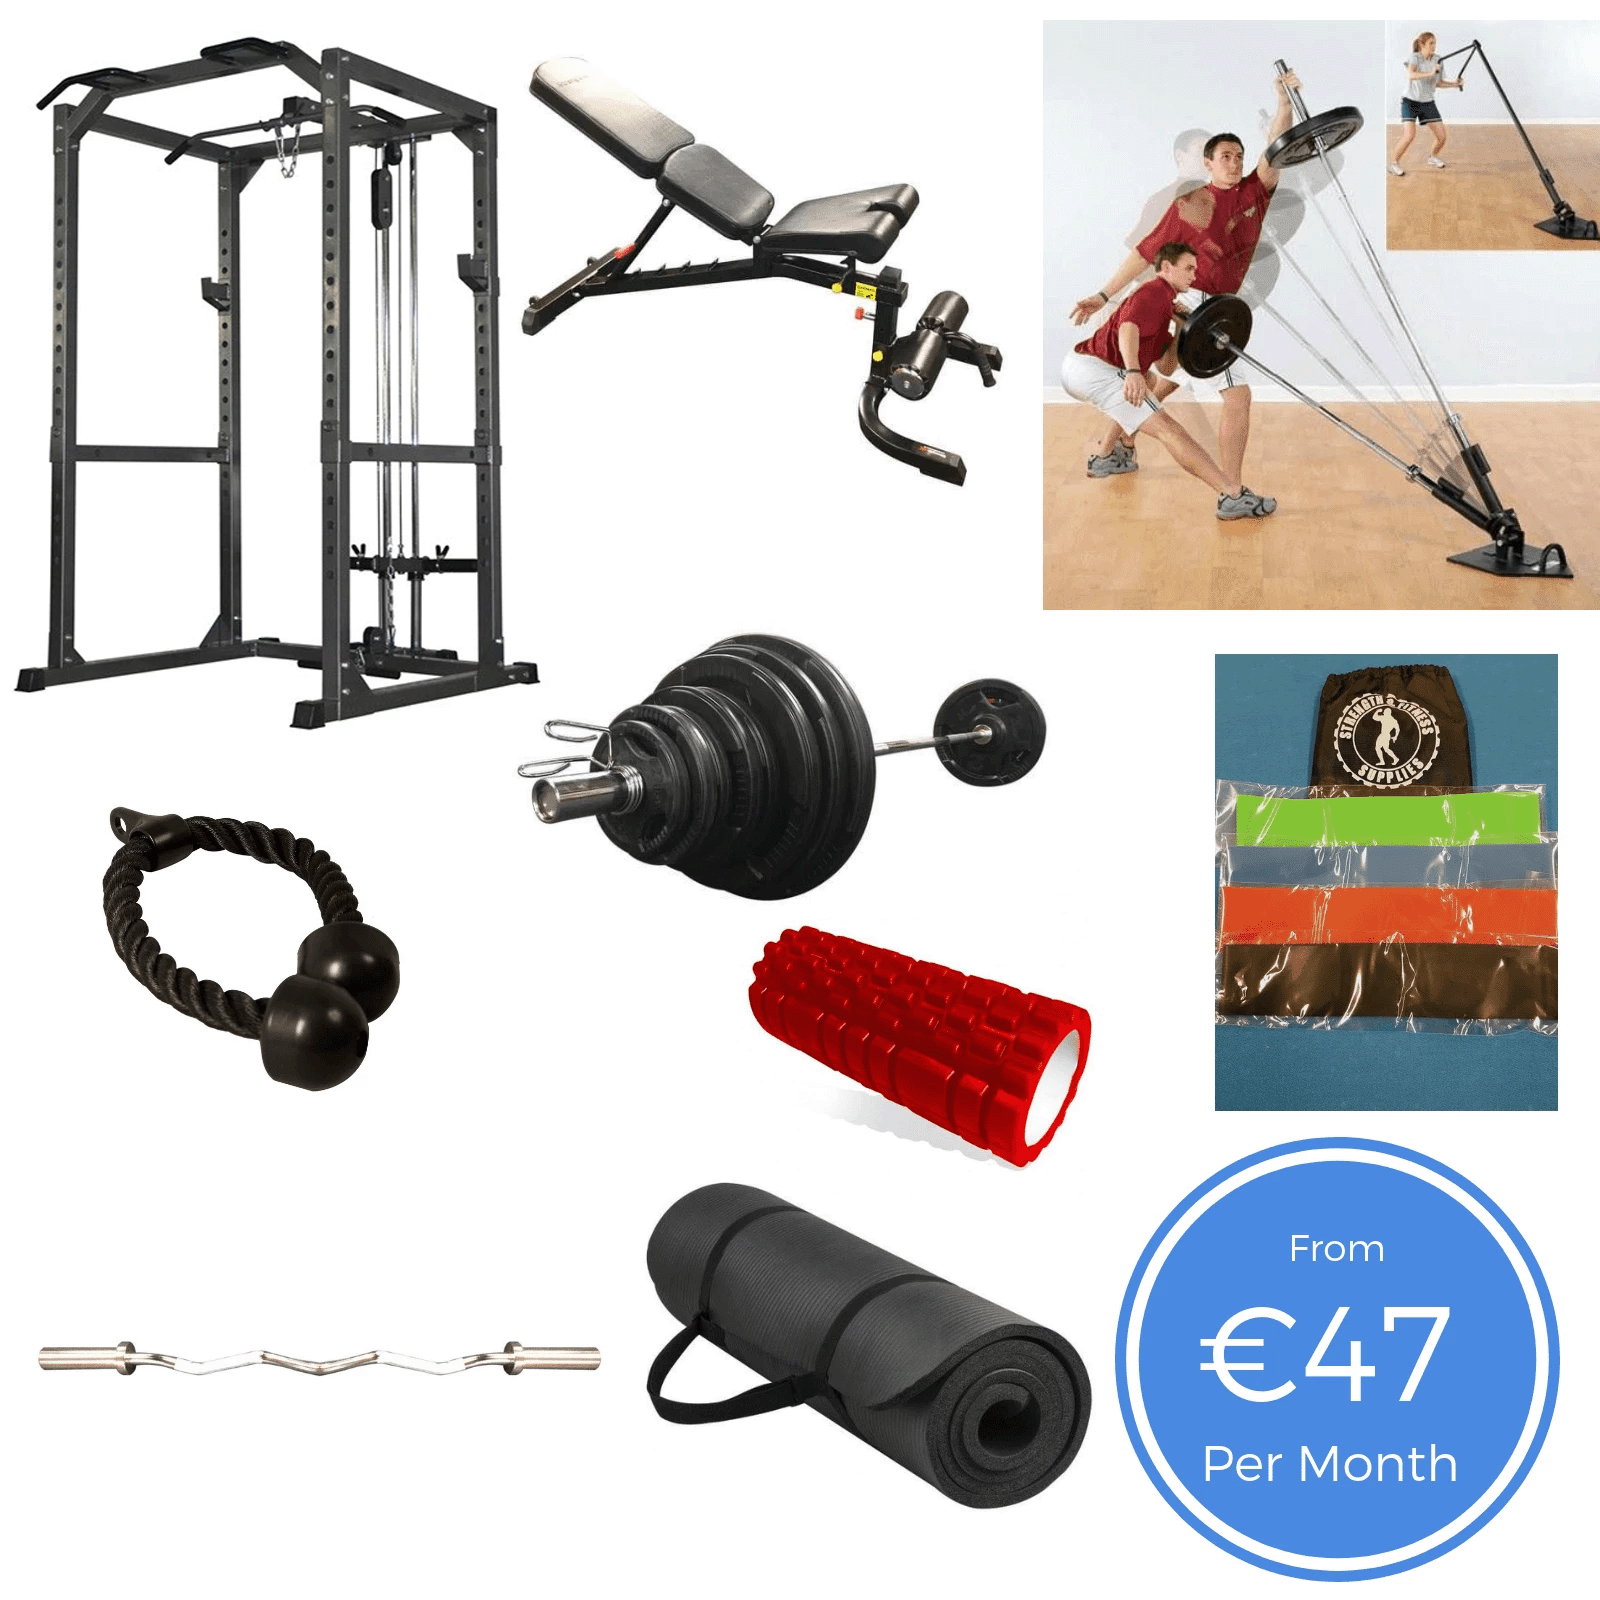 Download Best Ever Bundle Offer - Strength and Fitness Supplies